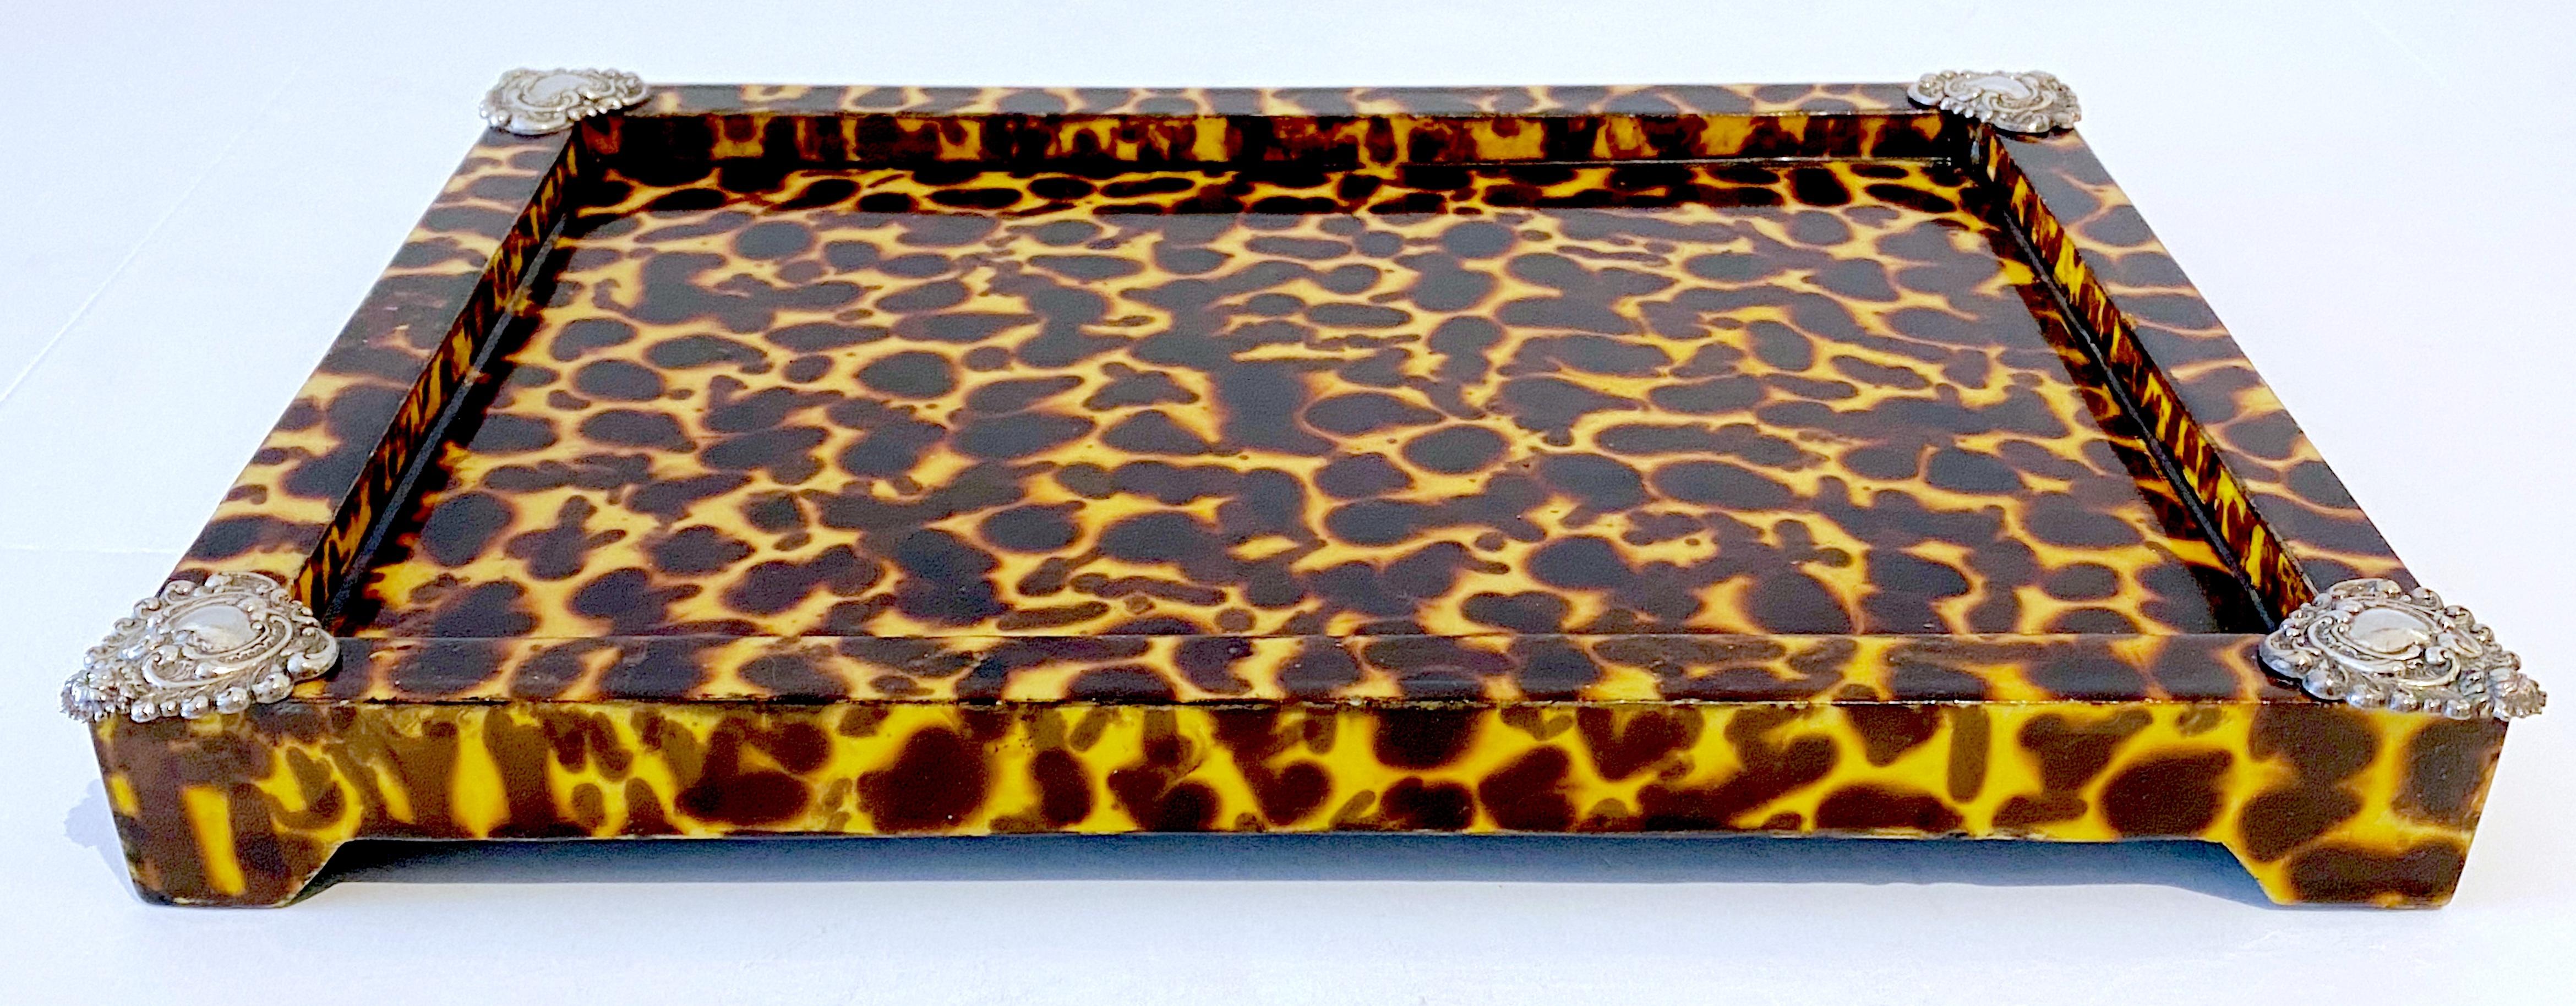 European Sheik Sterling Silver Mounted Faux Tortoise Shell Lacquered Tray For Sale